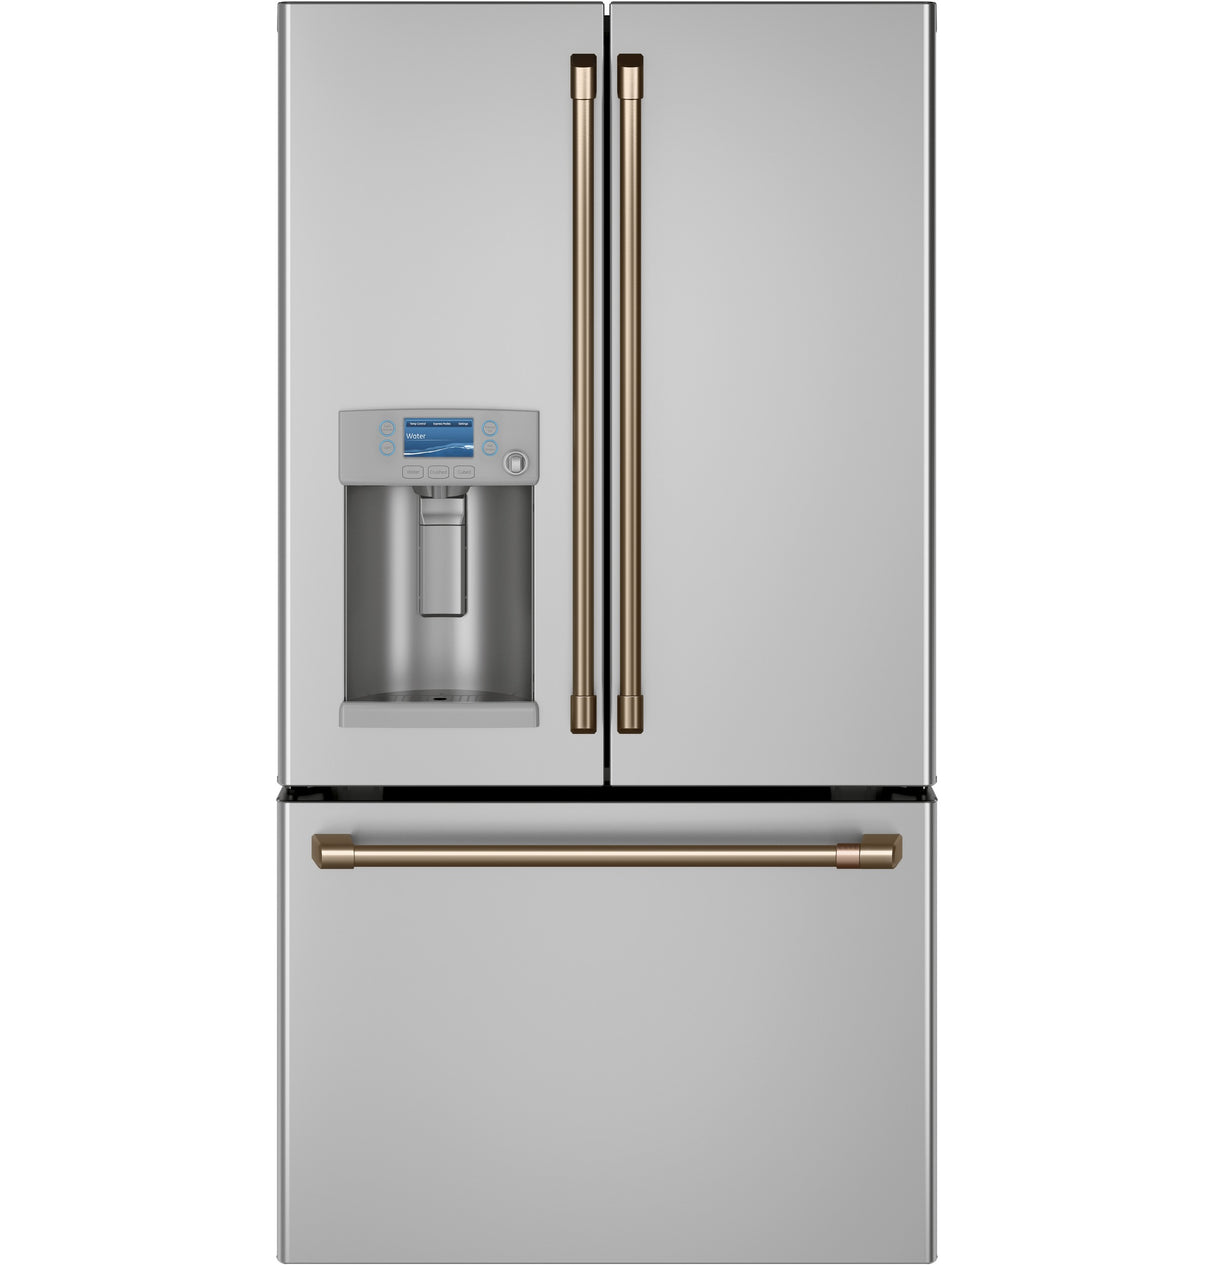 Caf(eback)(TM) ENERGY STAR(R) 22.1 Cu. Ft. Smart Counter-Depth French-Door Refrigerator with Hot Water Dispenser - (CYE22TP2MS1)